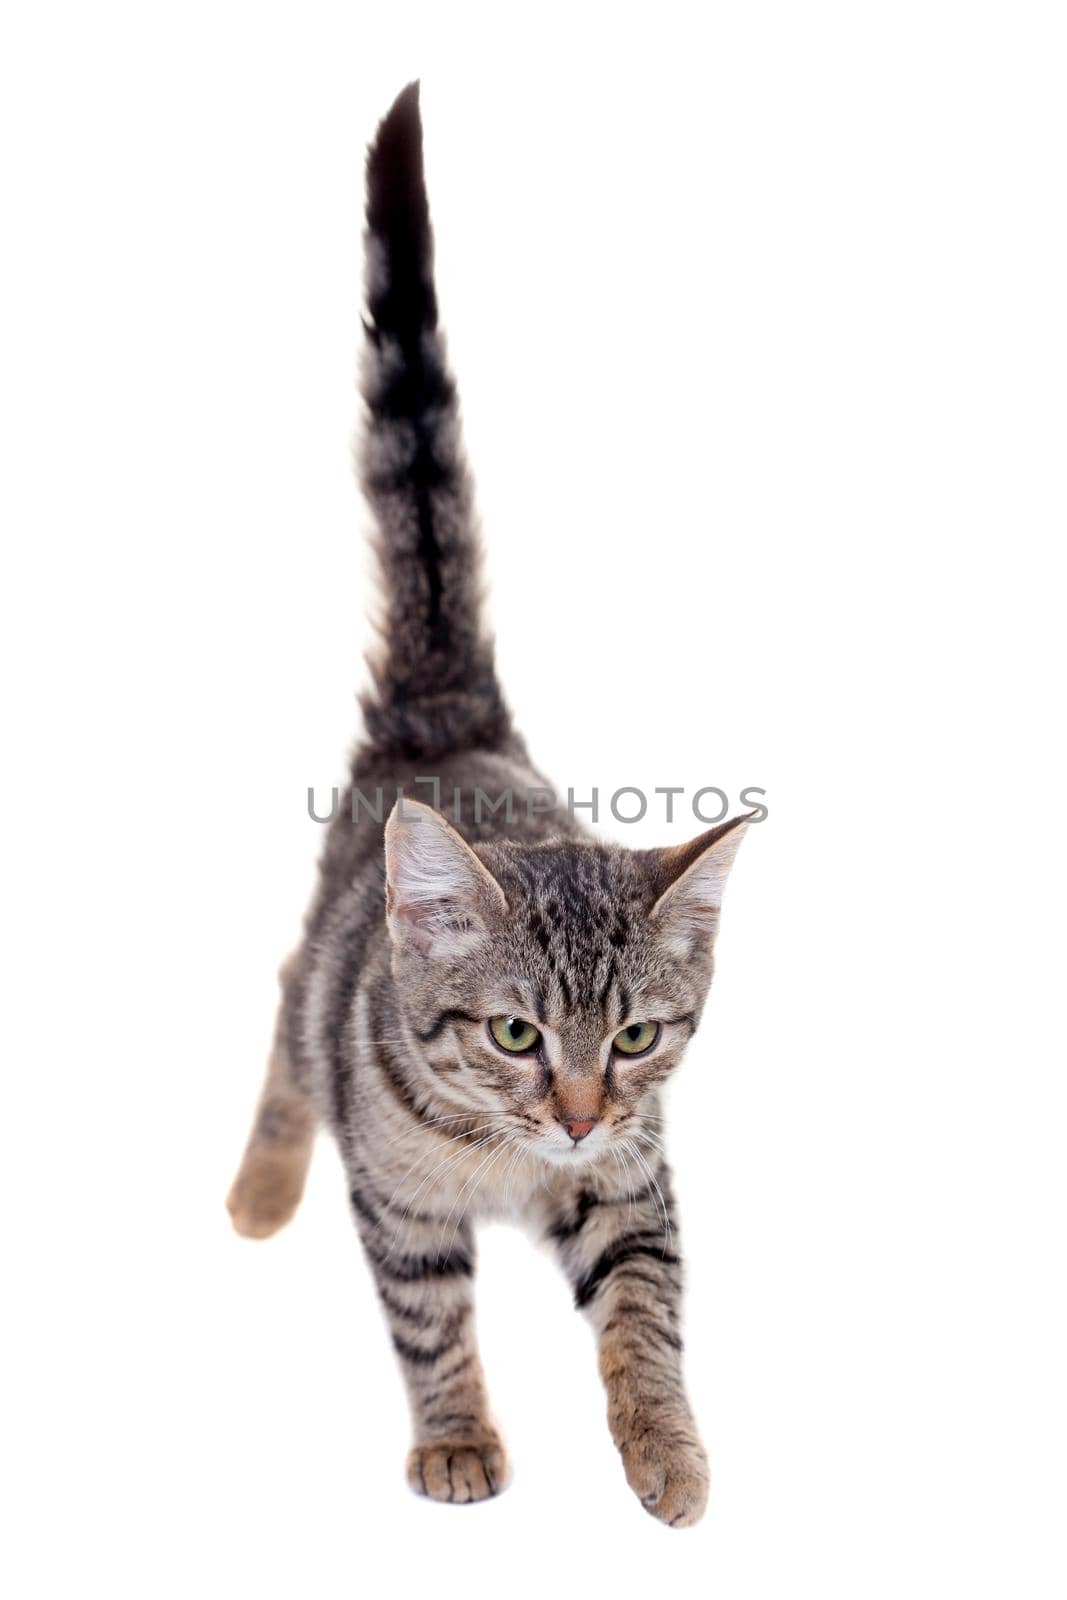 Thin adult tabby cat, isolated on white background